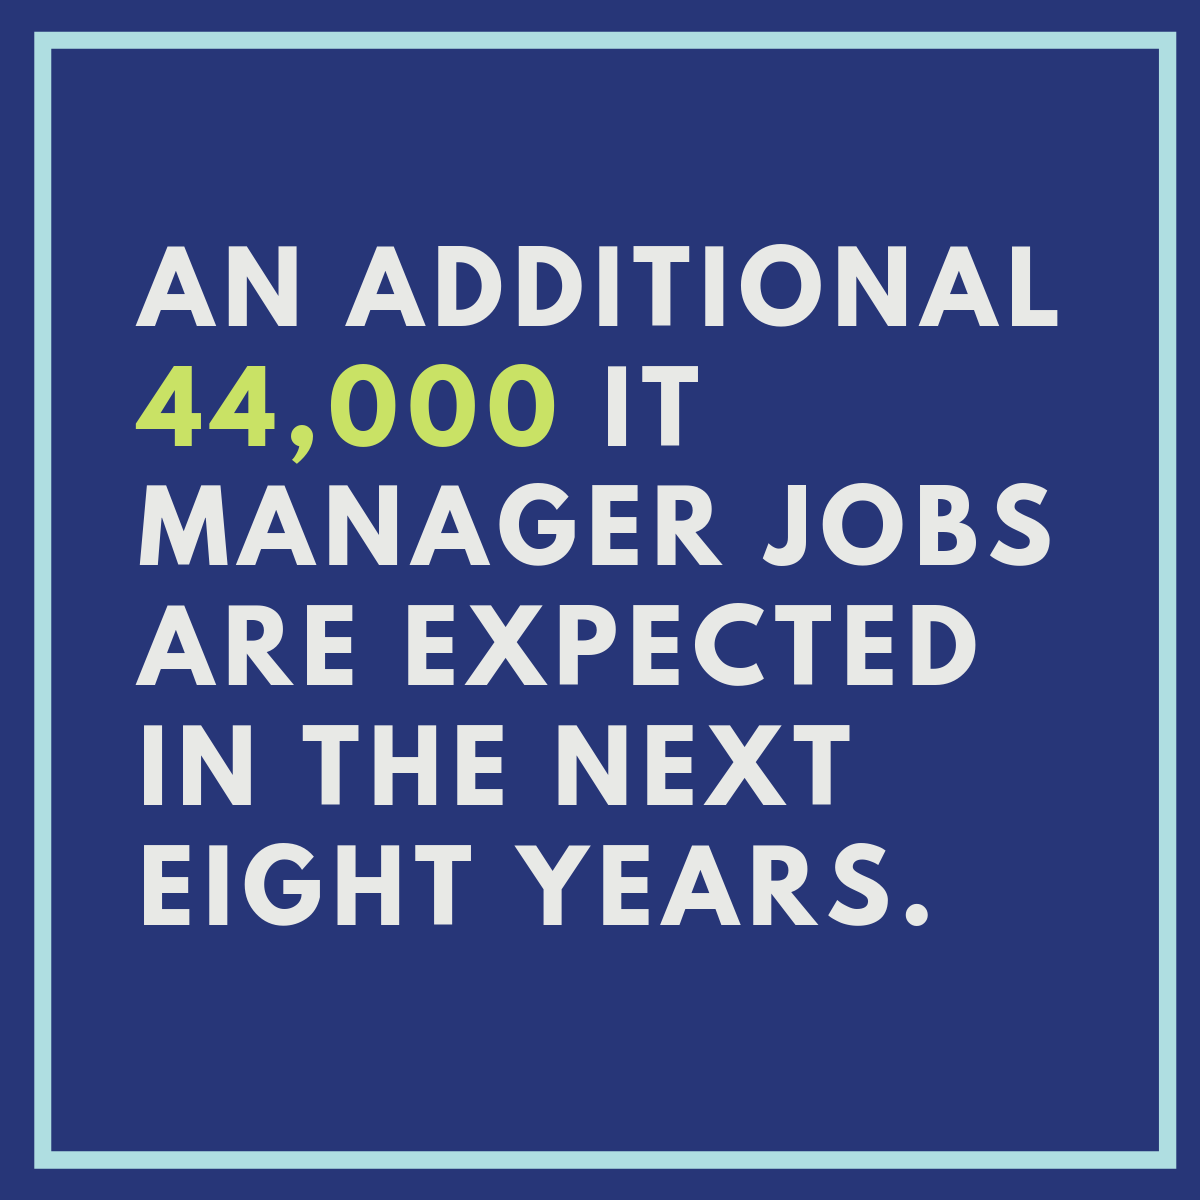 An additional 44,000 IT manager jobs are expected in the next eight years.